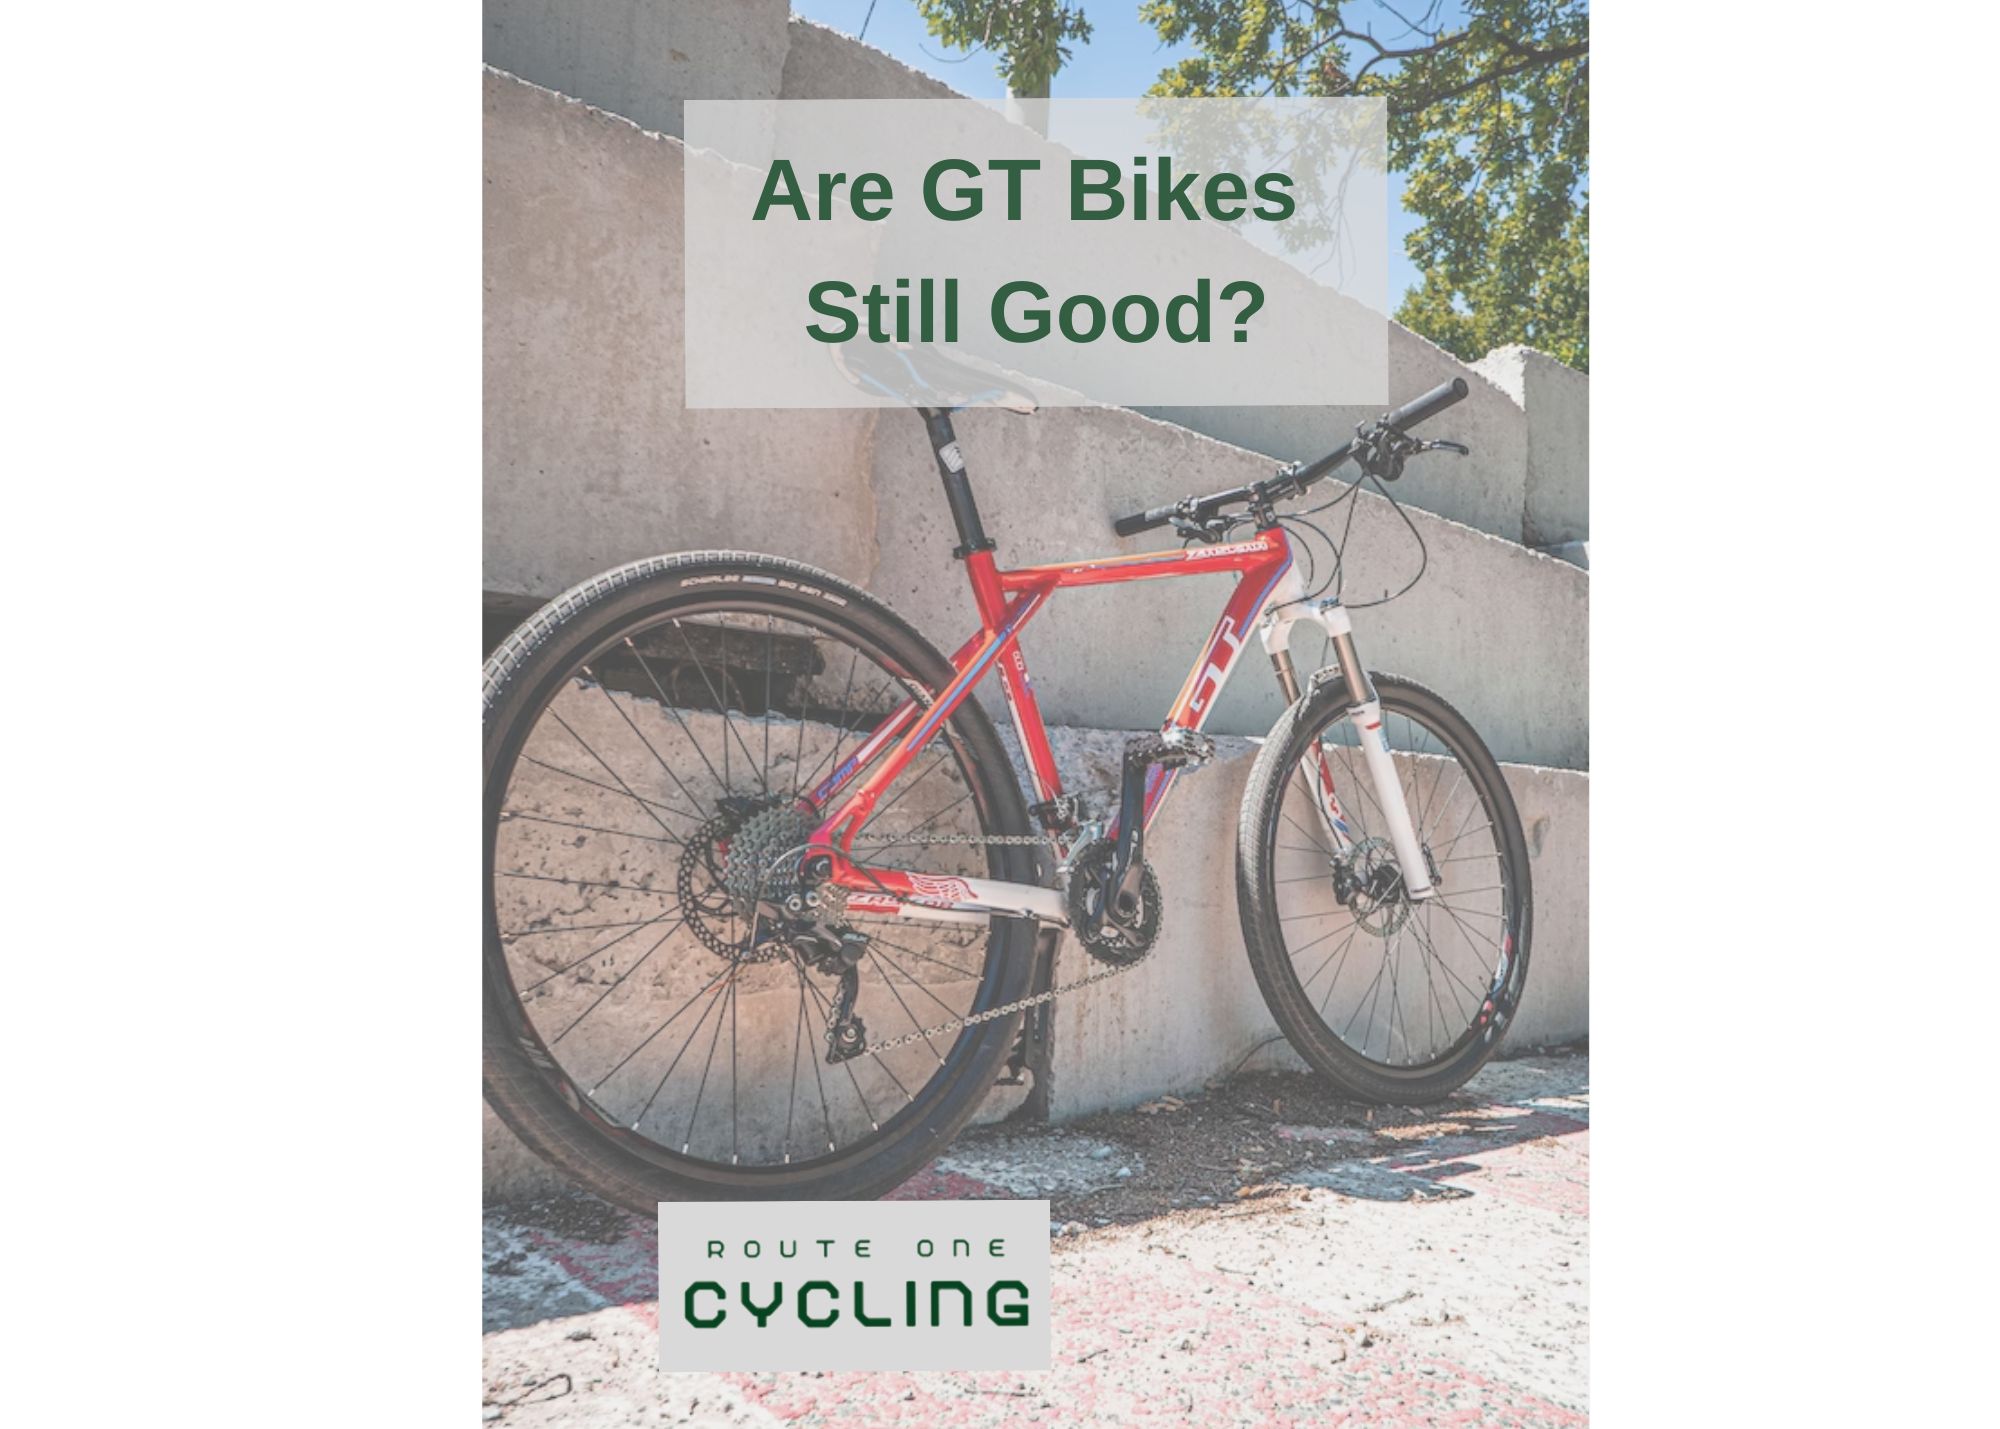 is gt a good bike brand cover image photo